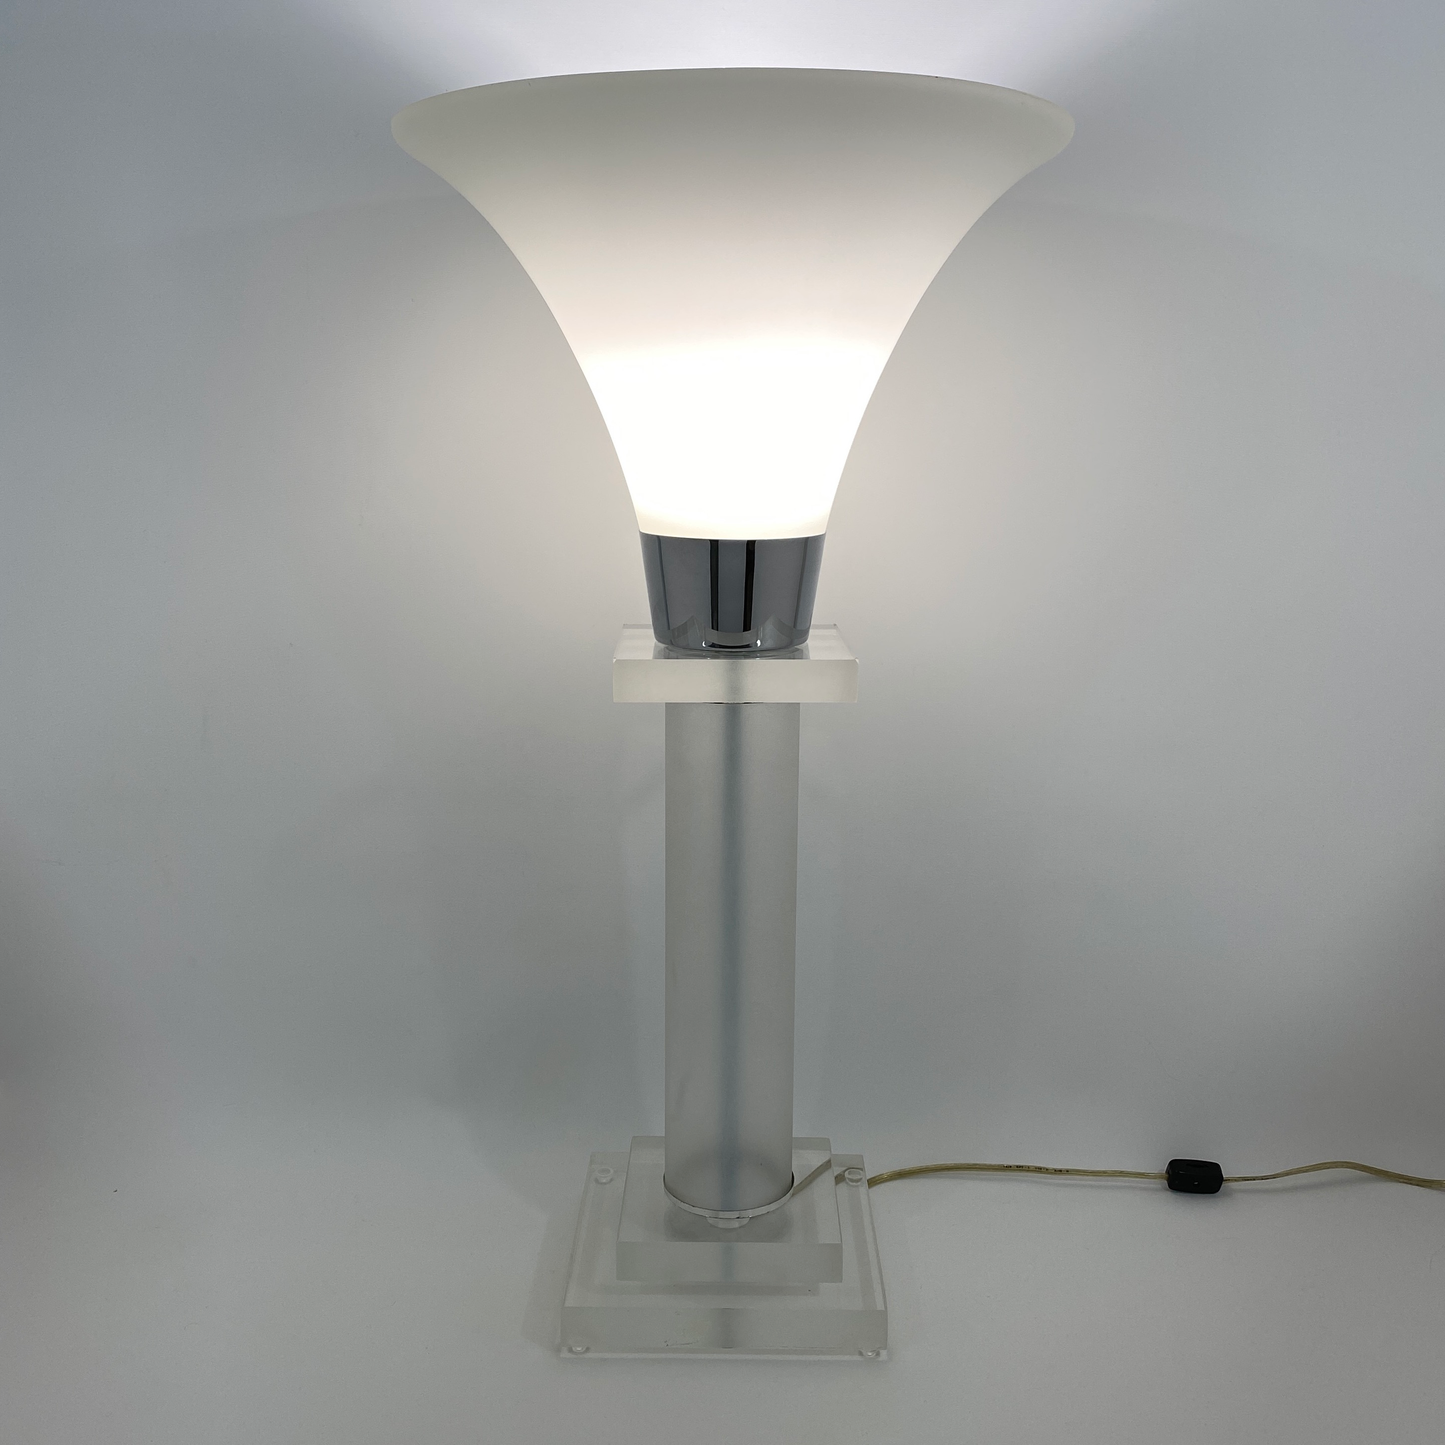 Lucite and Chrome Lamp With Tulip Opaline Glass Shade